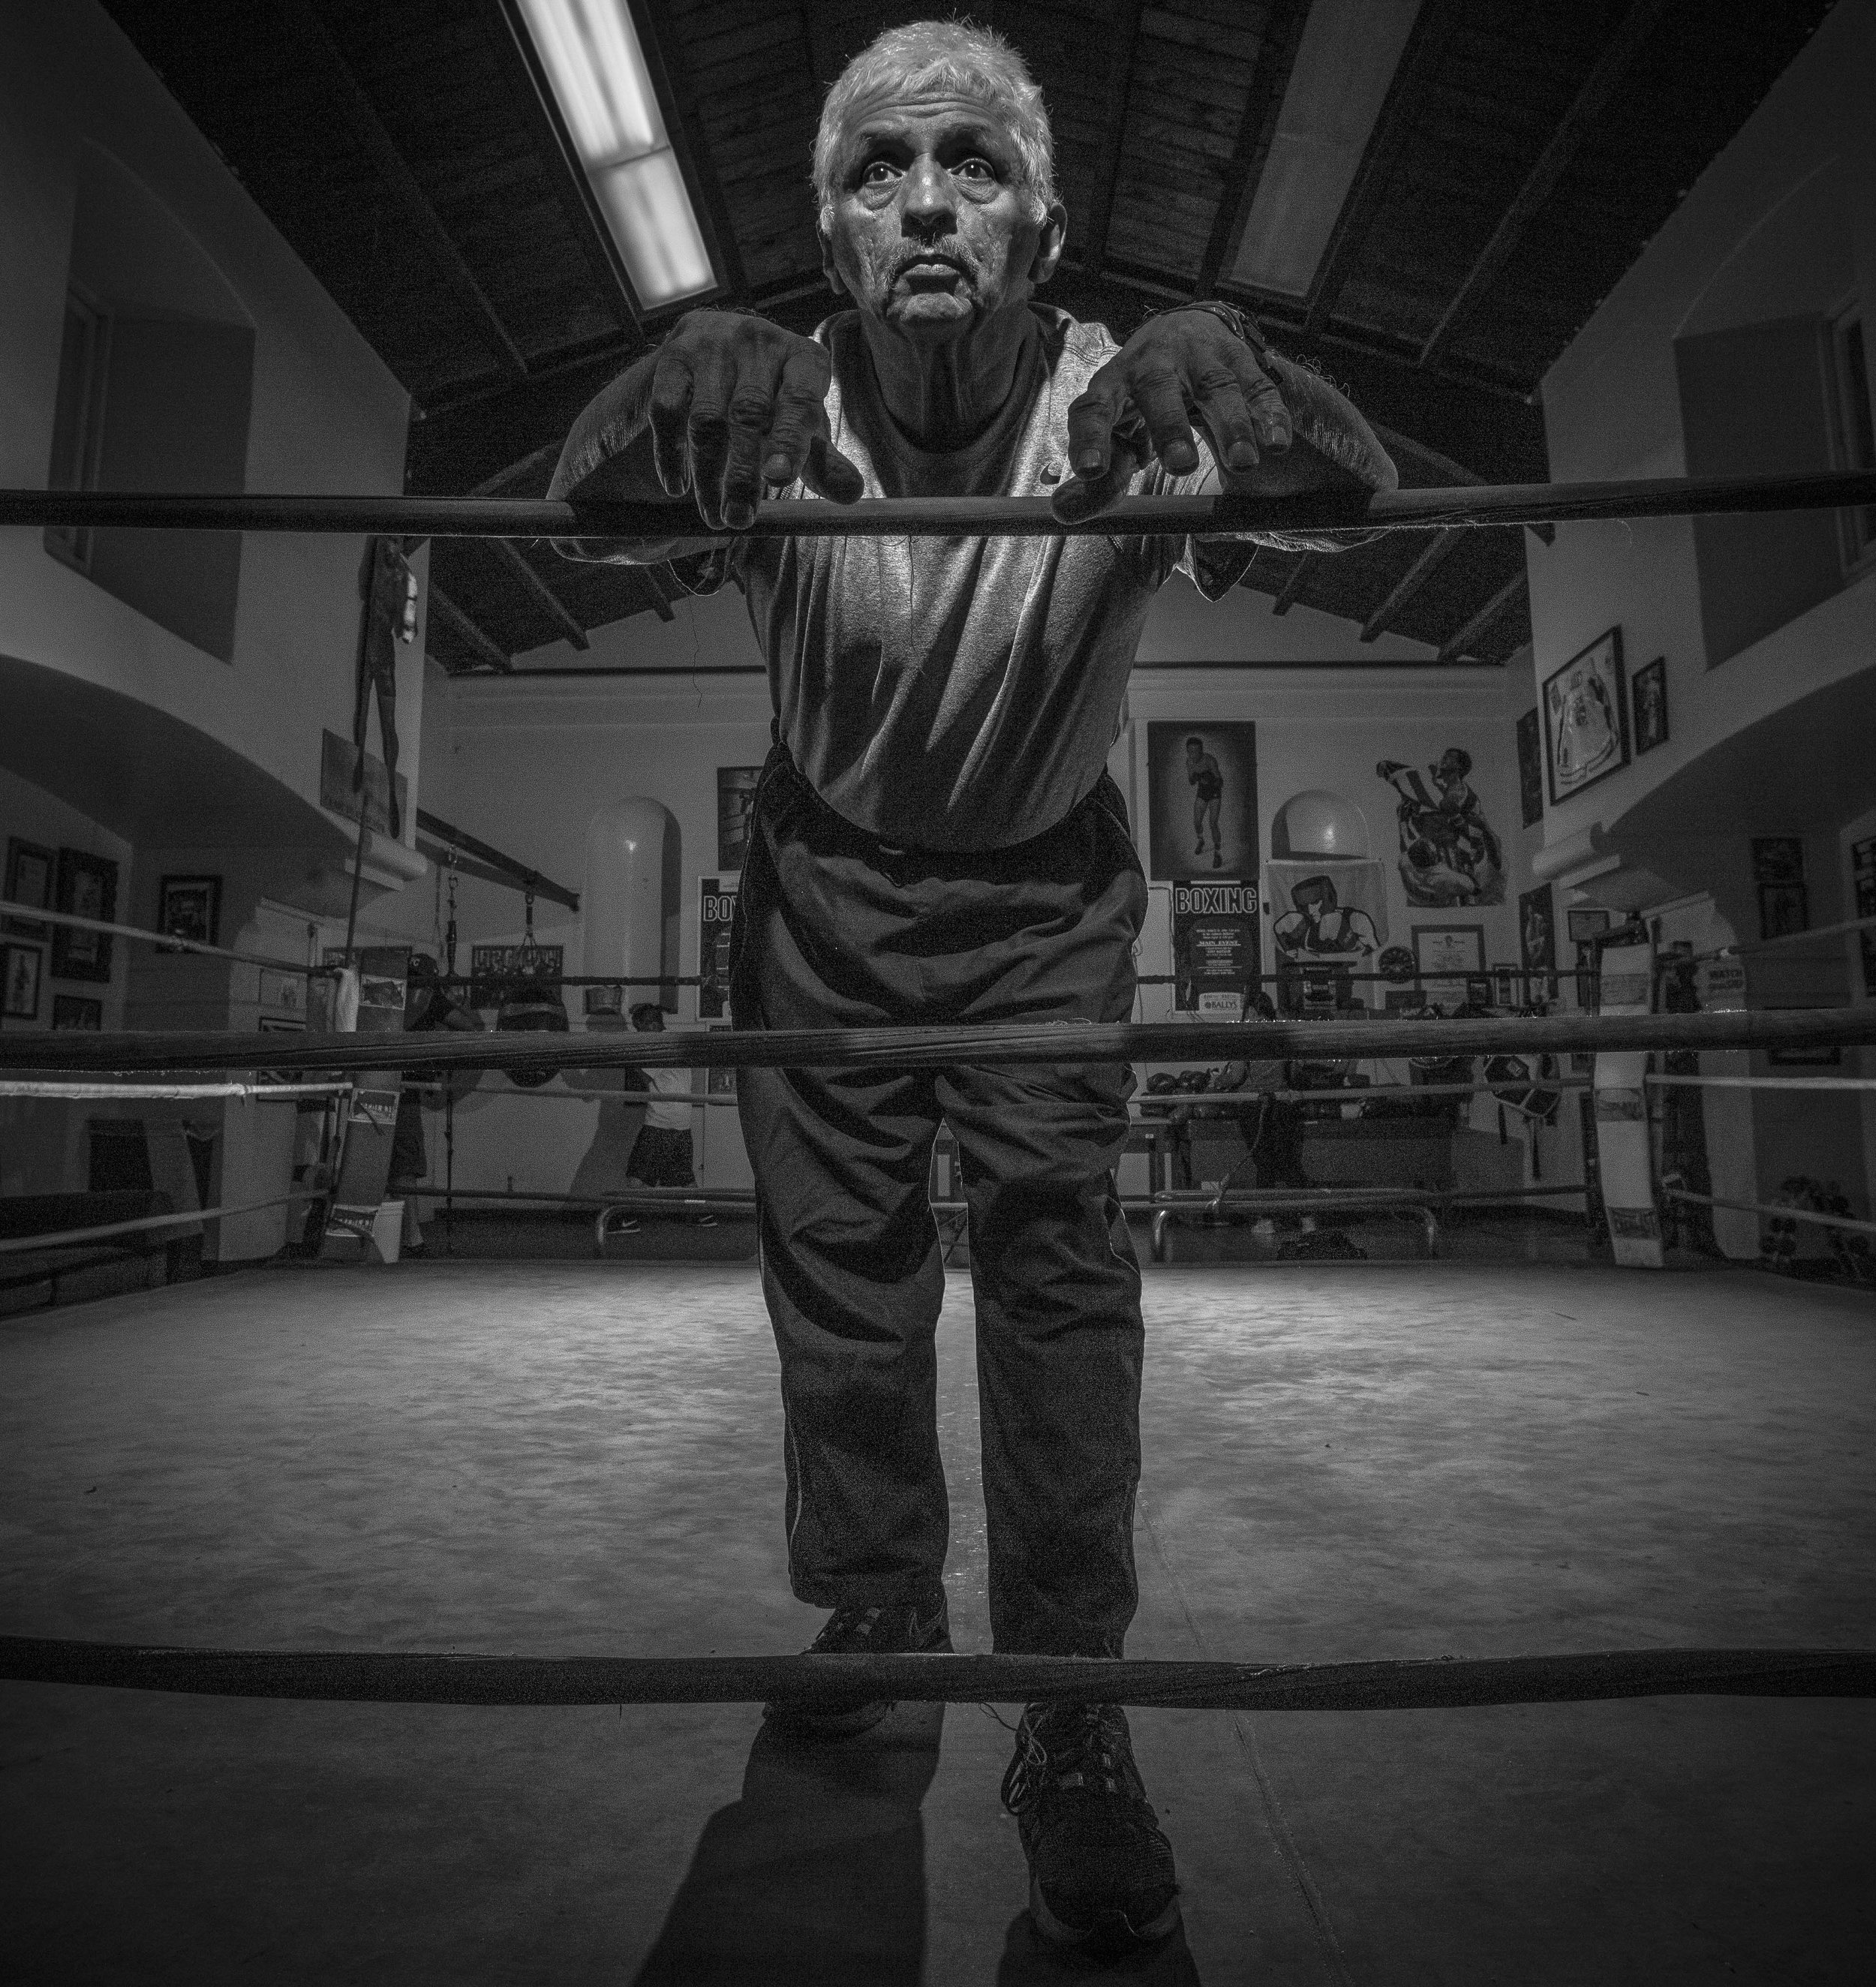  David Martinez has been the administrator, and trainer at the La Habra Boxing Club in La Habra Ca. for more than 25 years. He got into boxing after he was a medic in the veitnam war. Photo taken on November 5th 2015. (Photo By: Daniel Bowyer/Sports 